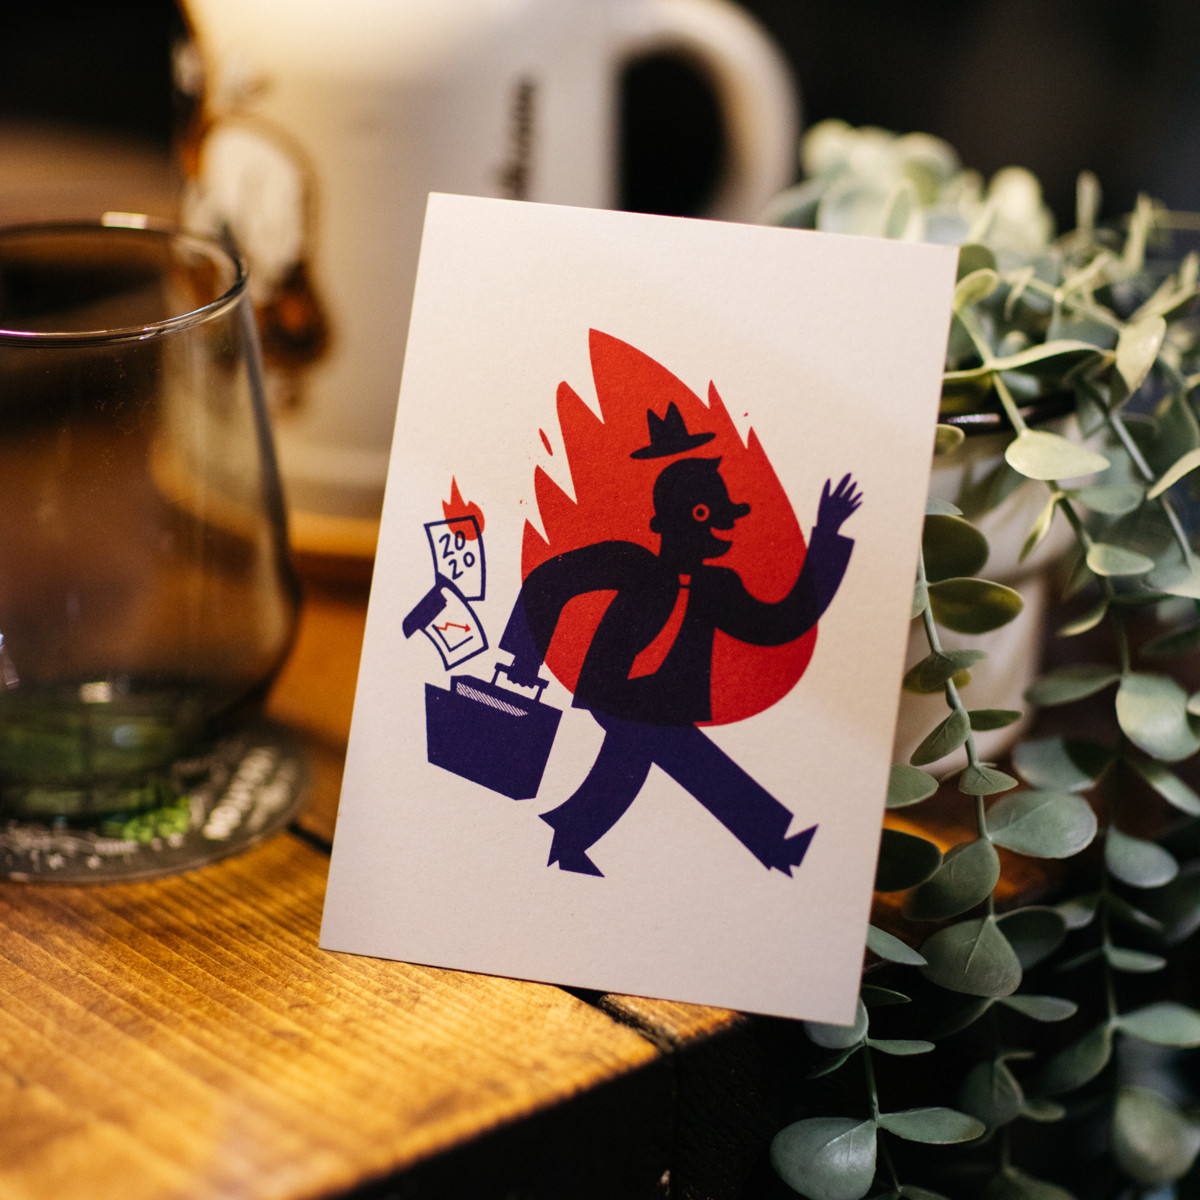 A6 art print image of man running with flames